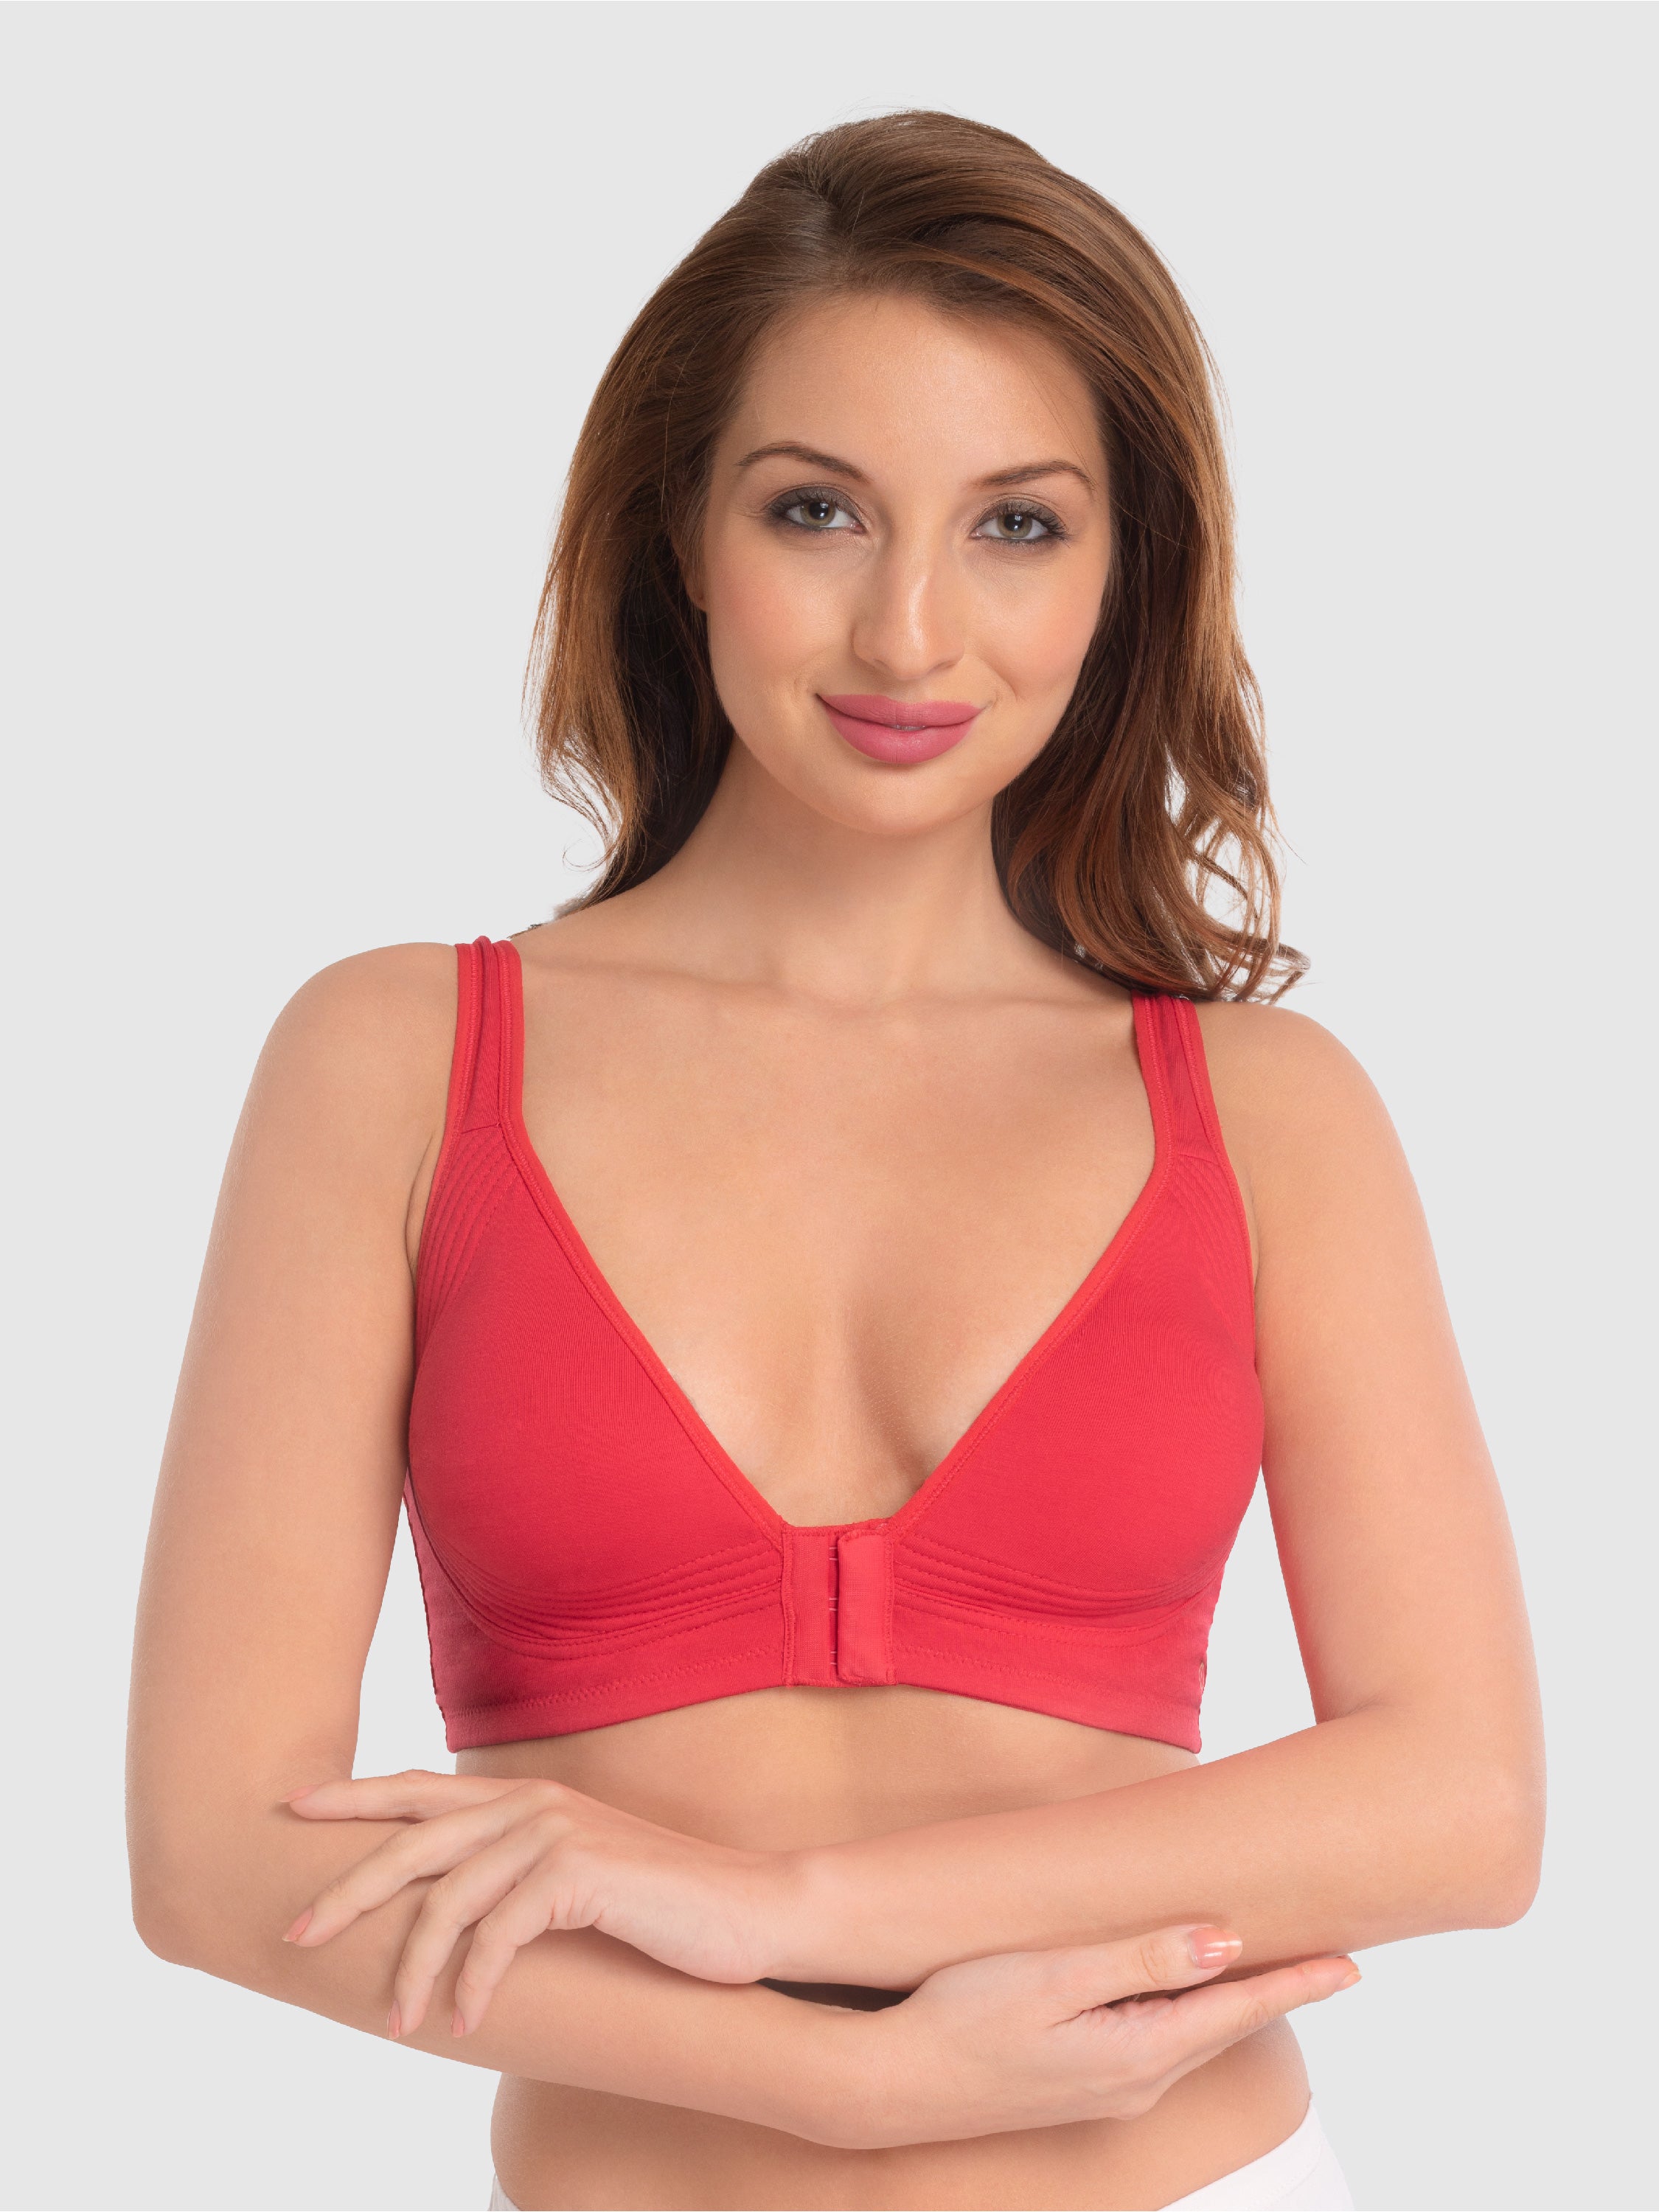 Daisy Dee Prime Red Non Padded Non-Wired Full Coverage Front Open Bra - NRIA-Prime Red